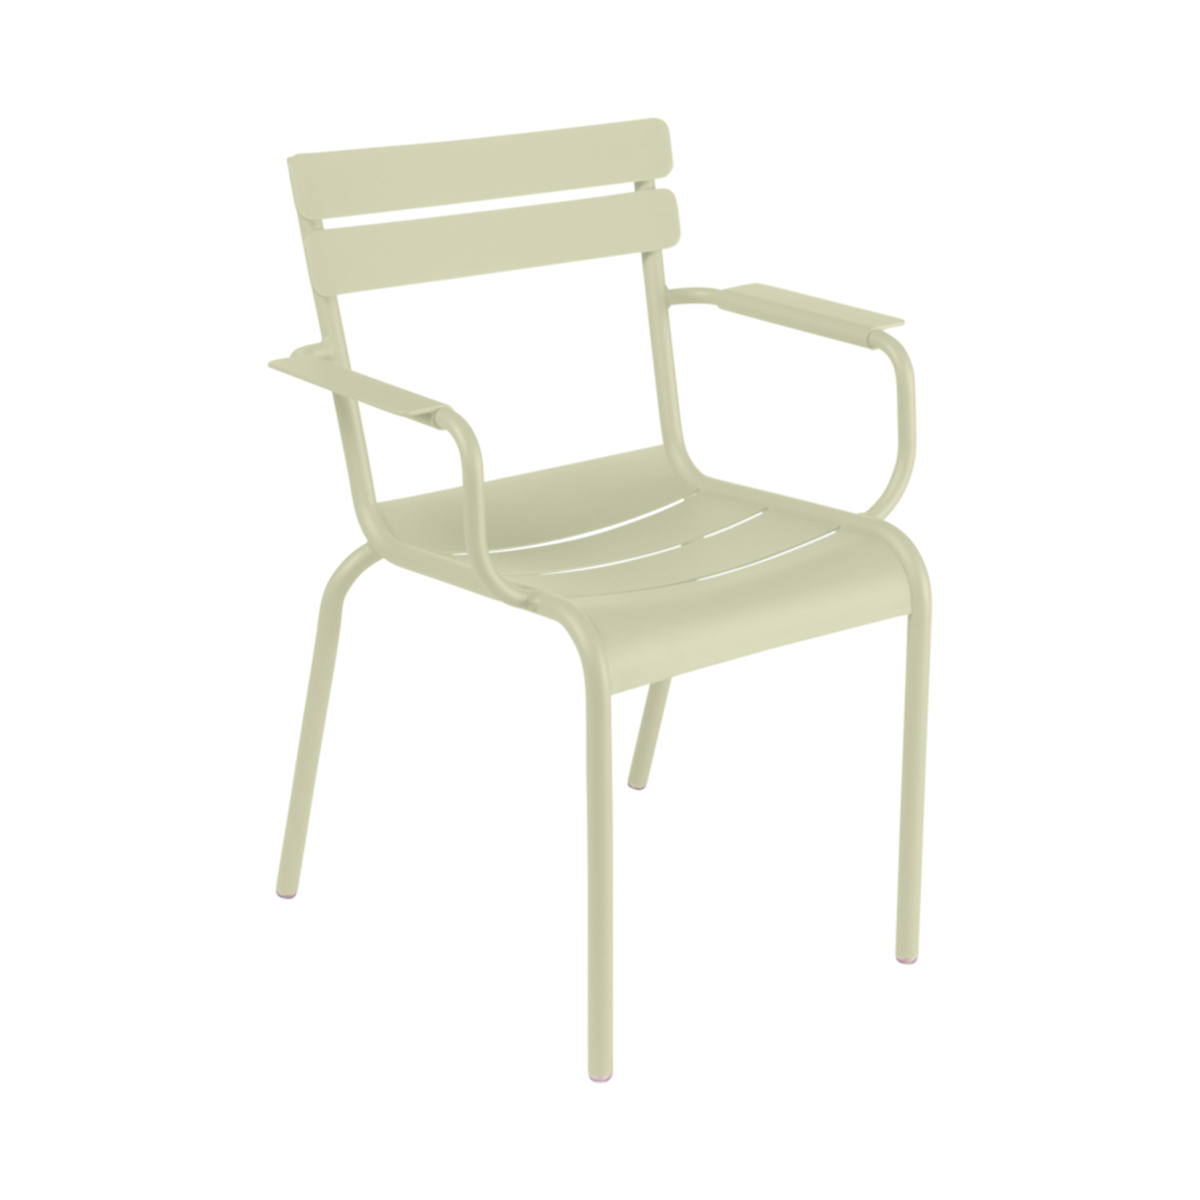 Fermob Luxembourg Armchair Orling Wu Orling Wu